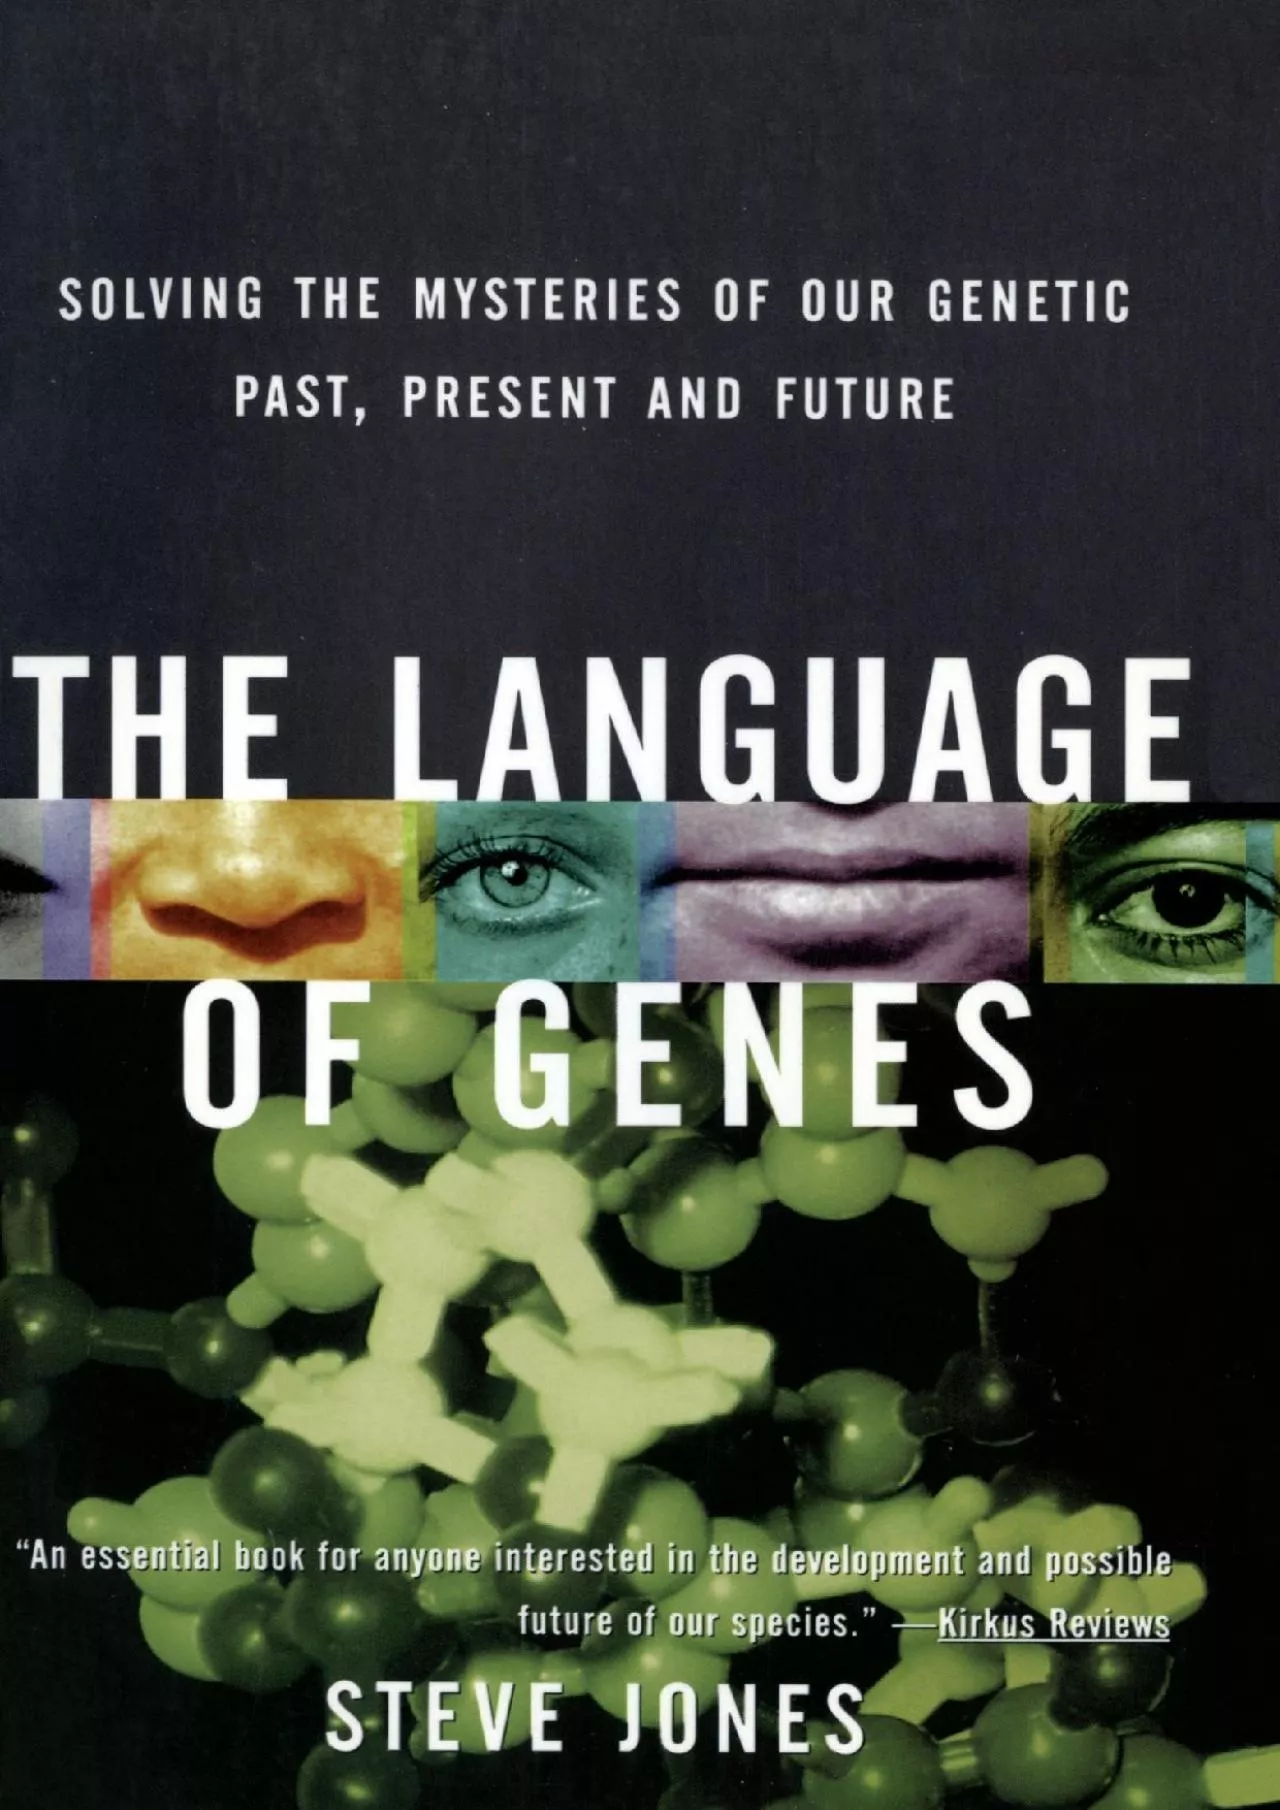 (EBOOK)-The Language of Genes: Solving the Mysteries of Our Genetic Past, Present and